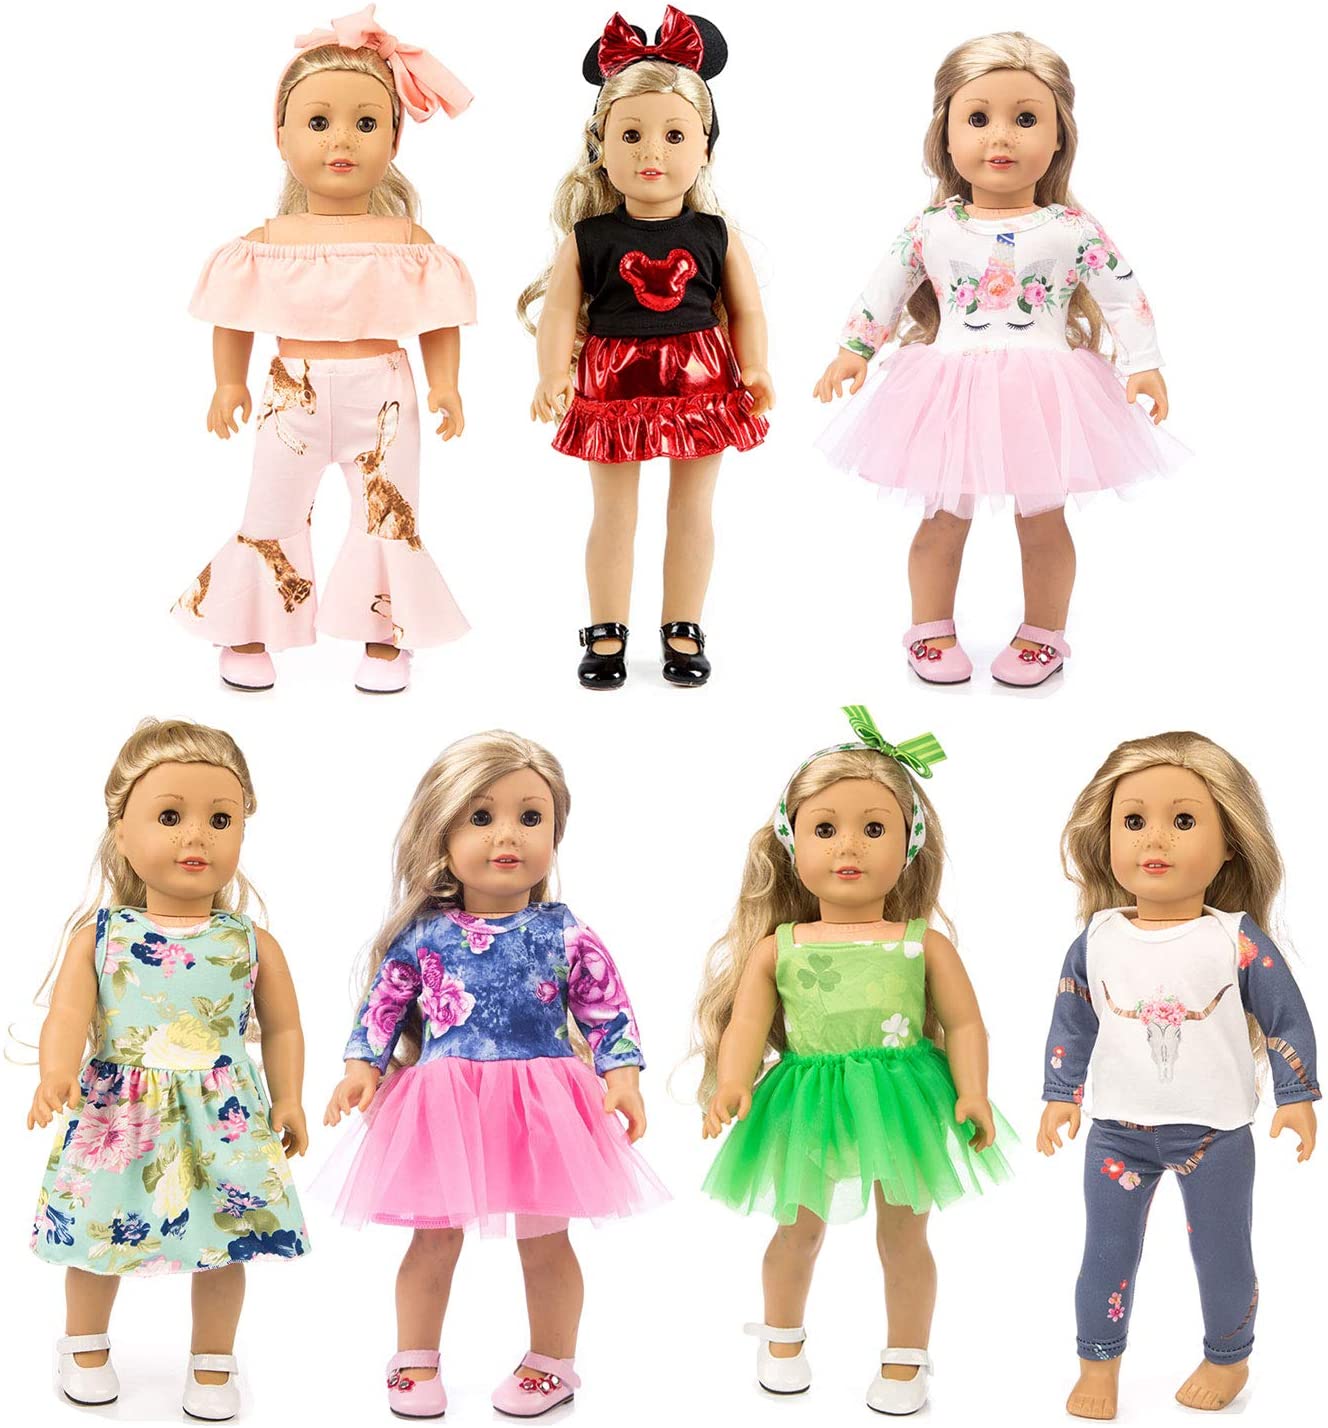 XFEYUE All Occasion 18-Inch American Girl Doll Clothes, 14-Piece